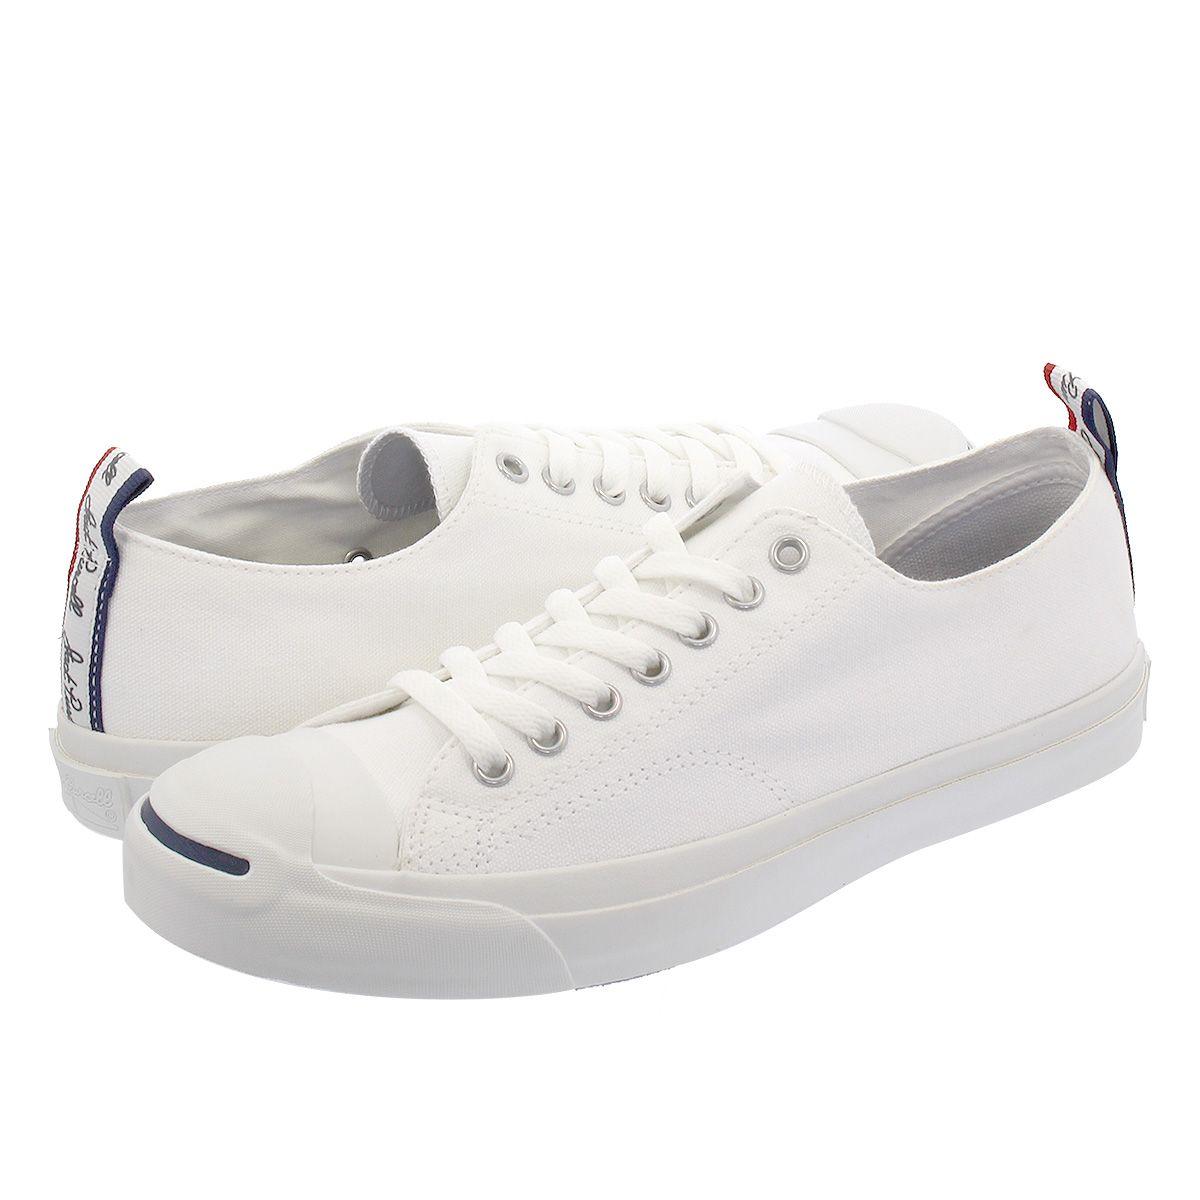 Purcell Logo - CONVERSE JACK PURCELL LOGOTAPE RH Converse Jack Pursel logo tape RH WHITE  32263610